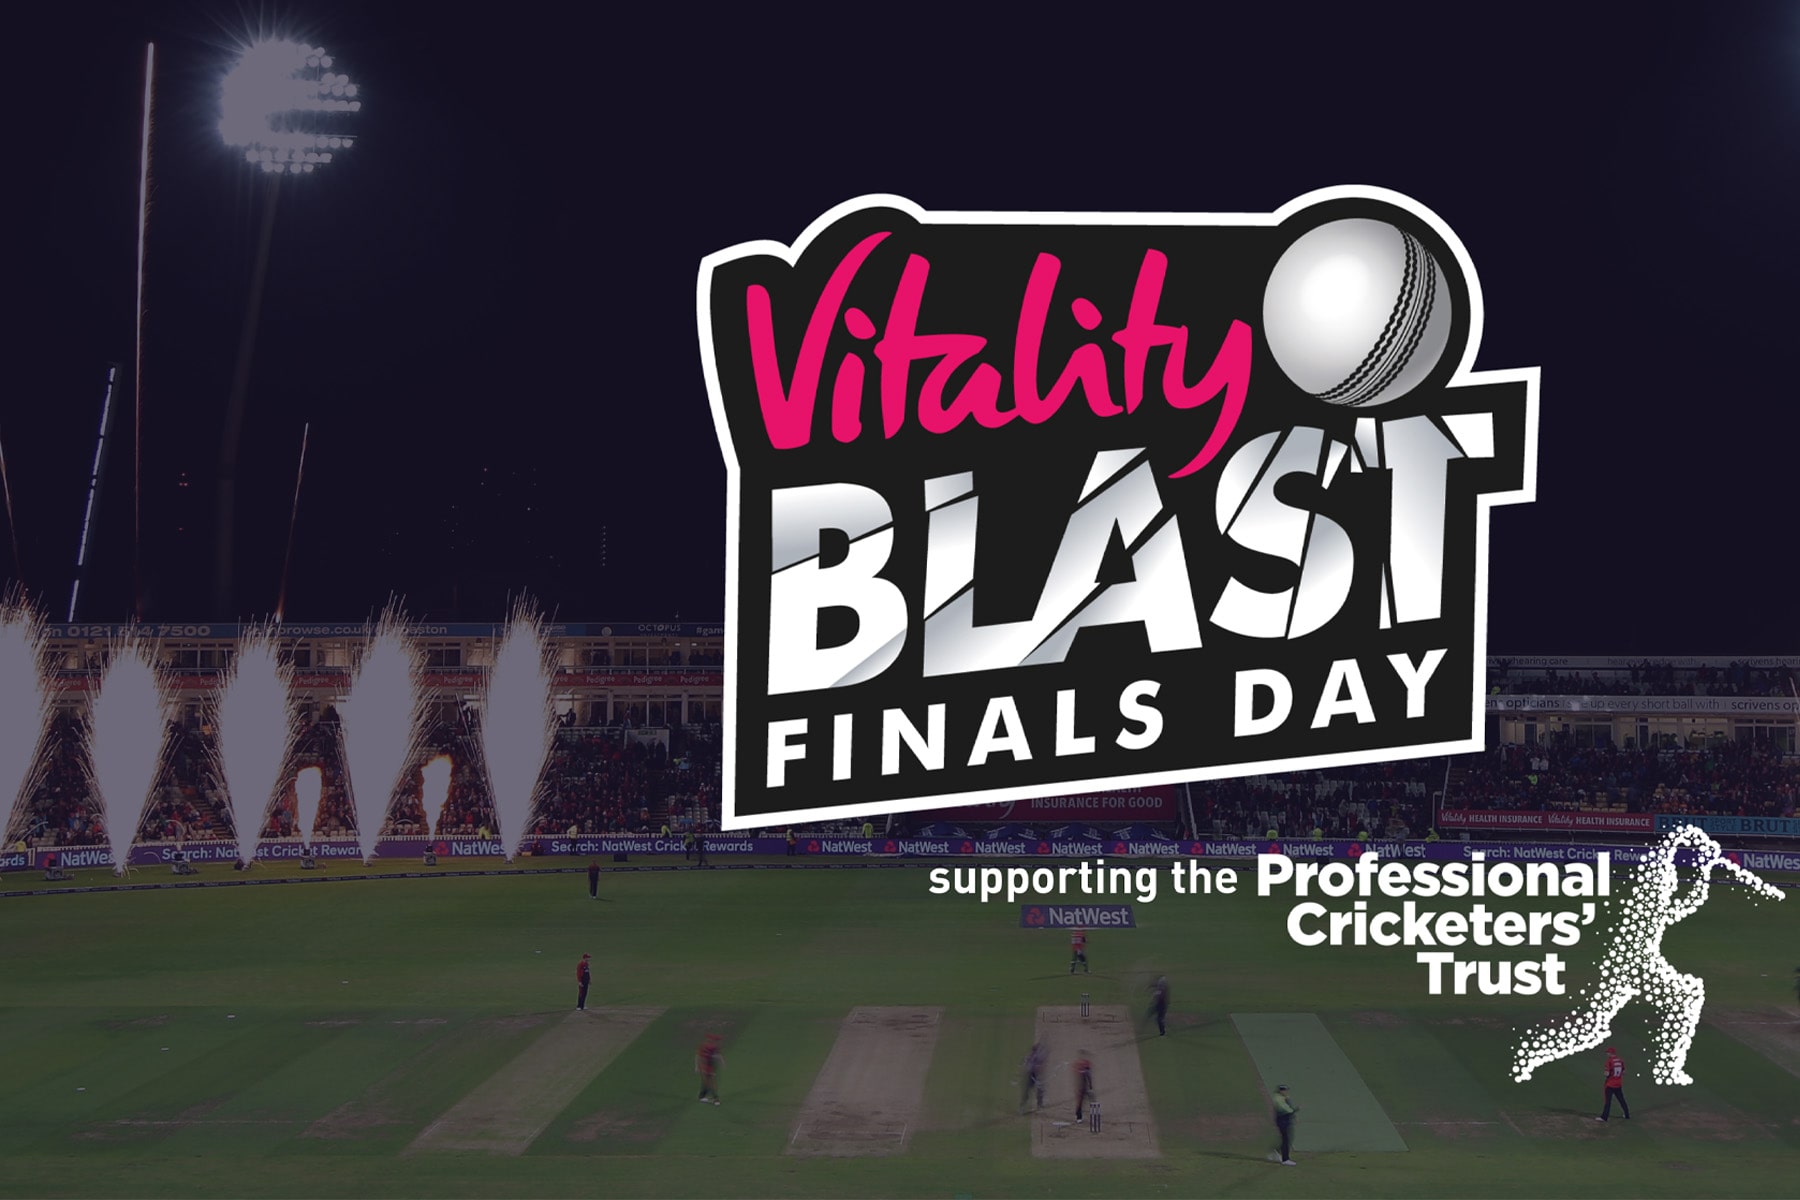 Vitality Blast Finals Day to support the Professional Cricketers’ Trust